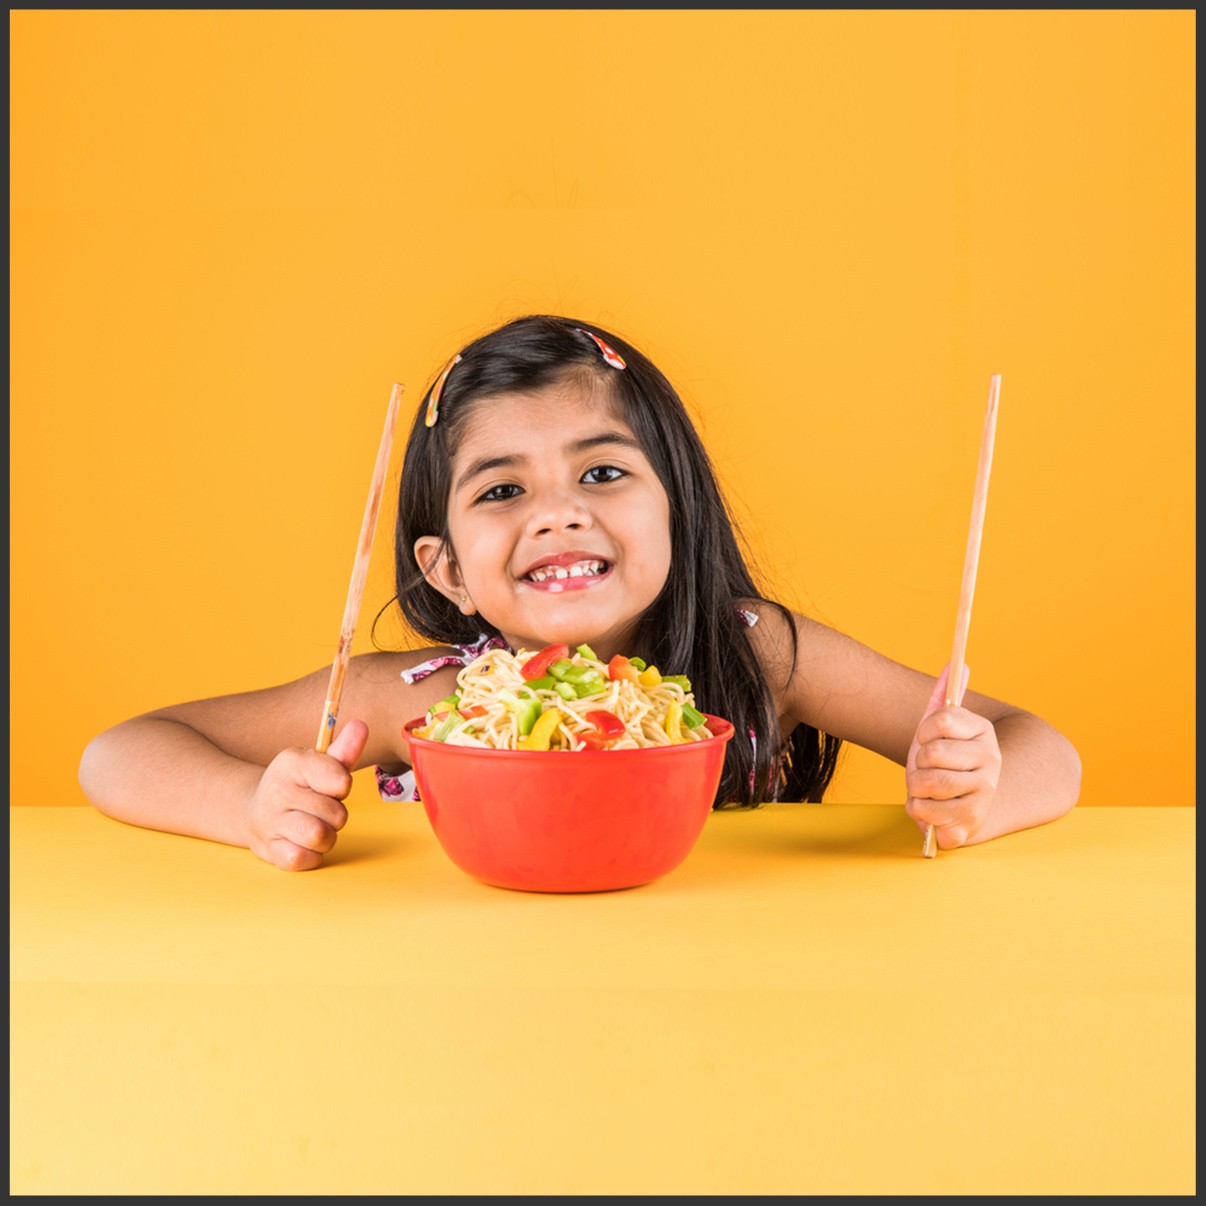 6 Healthy snacks for kids while they stay at home